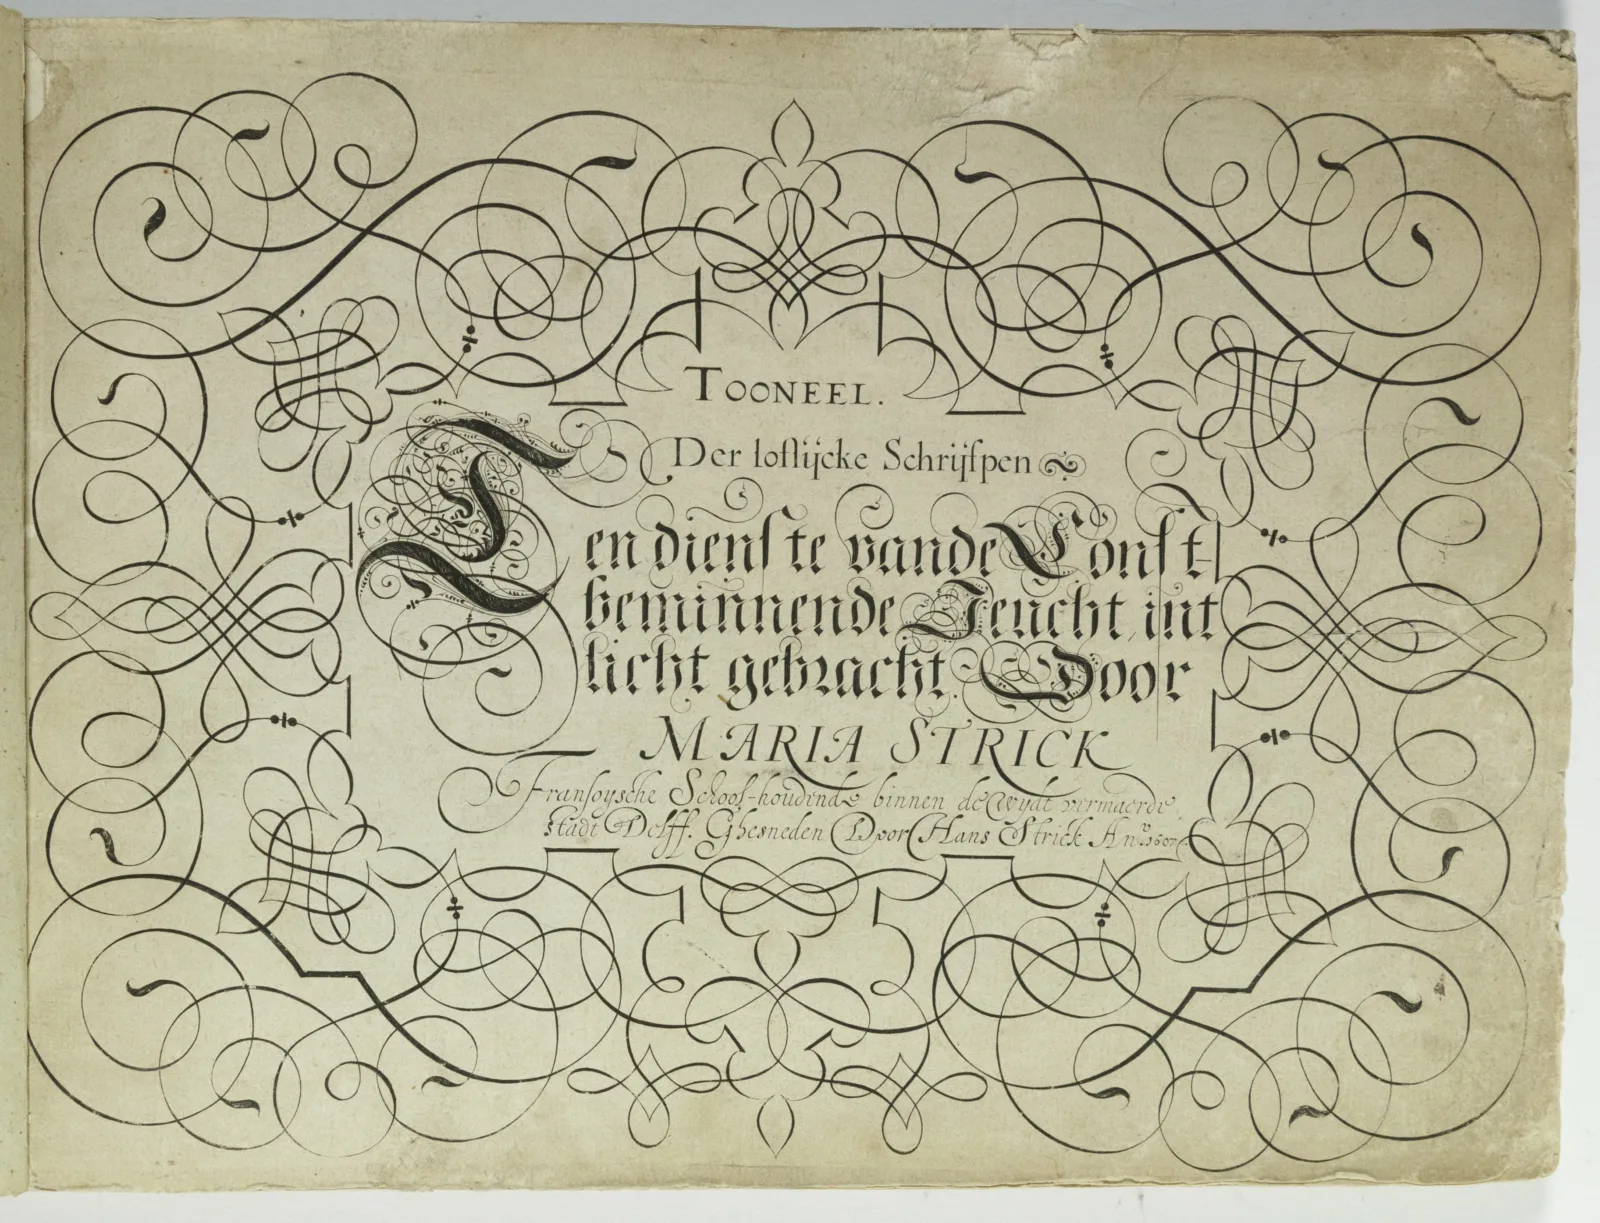 Calligraphic writing appears in the middle of the page. Under the writing are the words “Maria Strick.” Surrounding the handwriting are loops and flourishes.